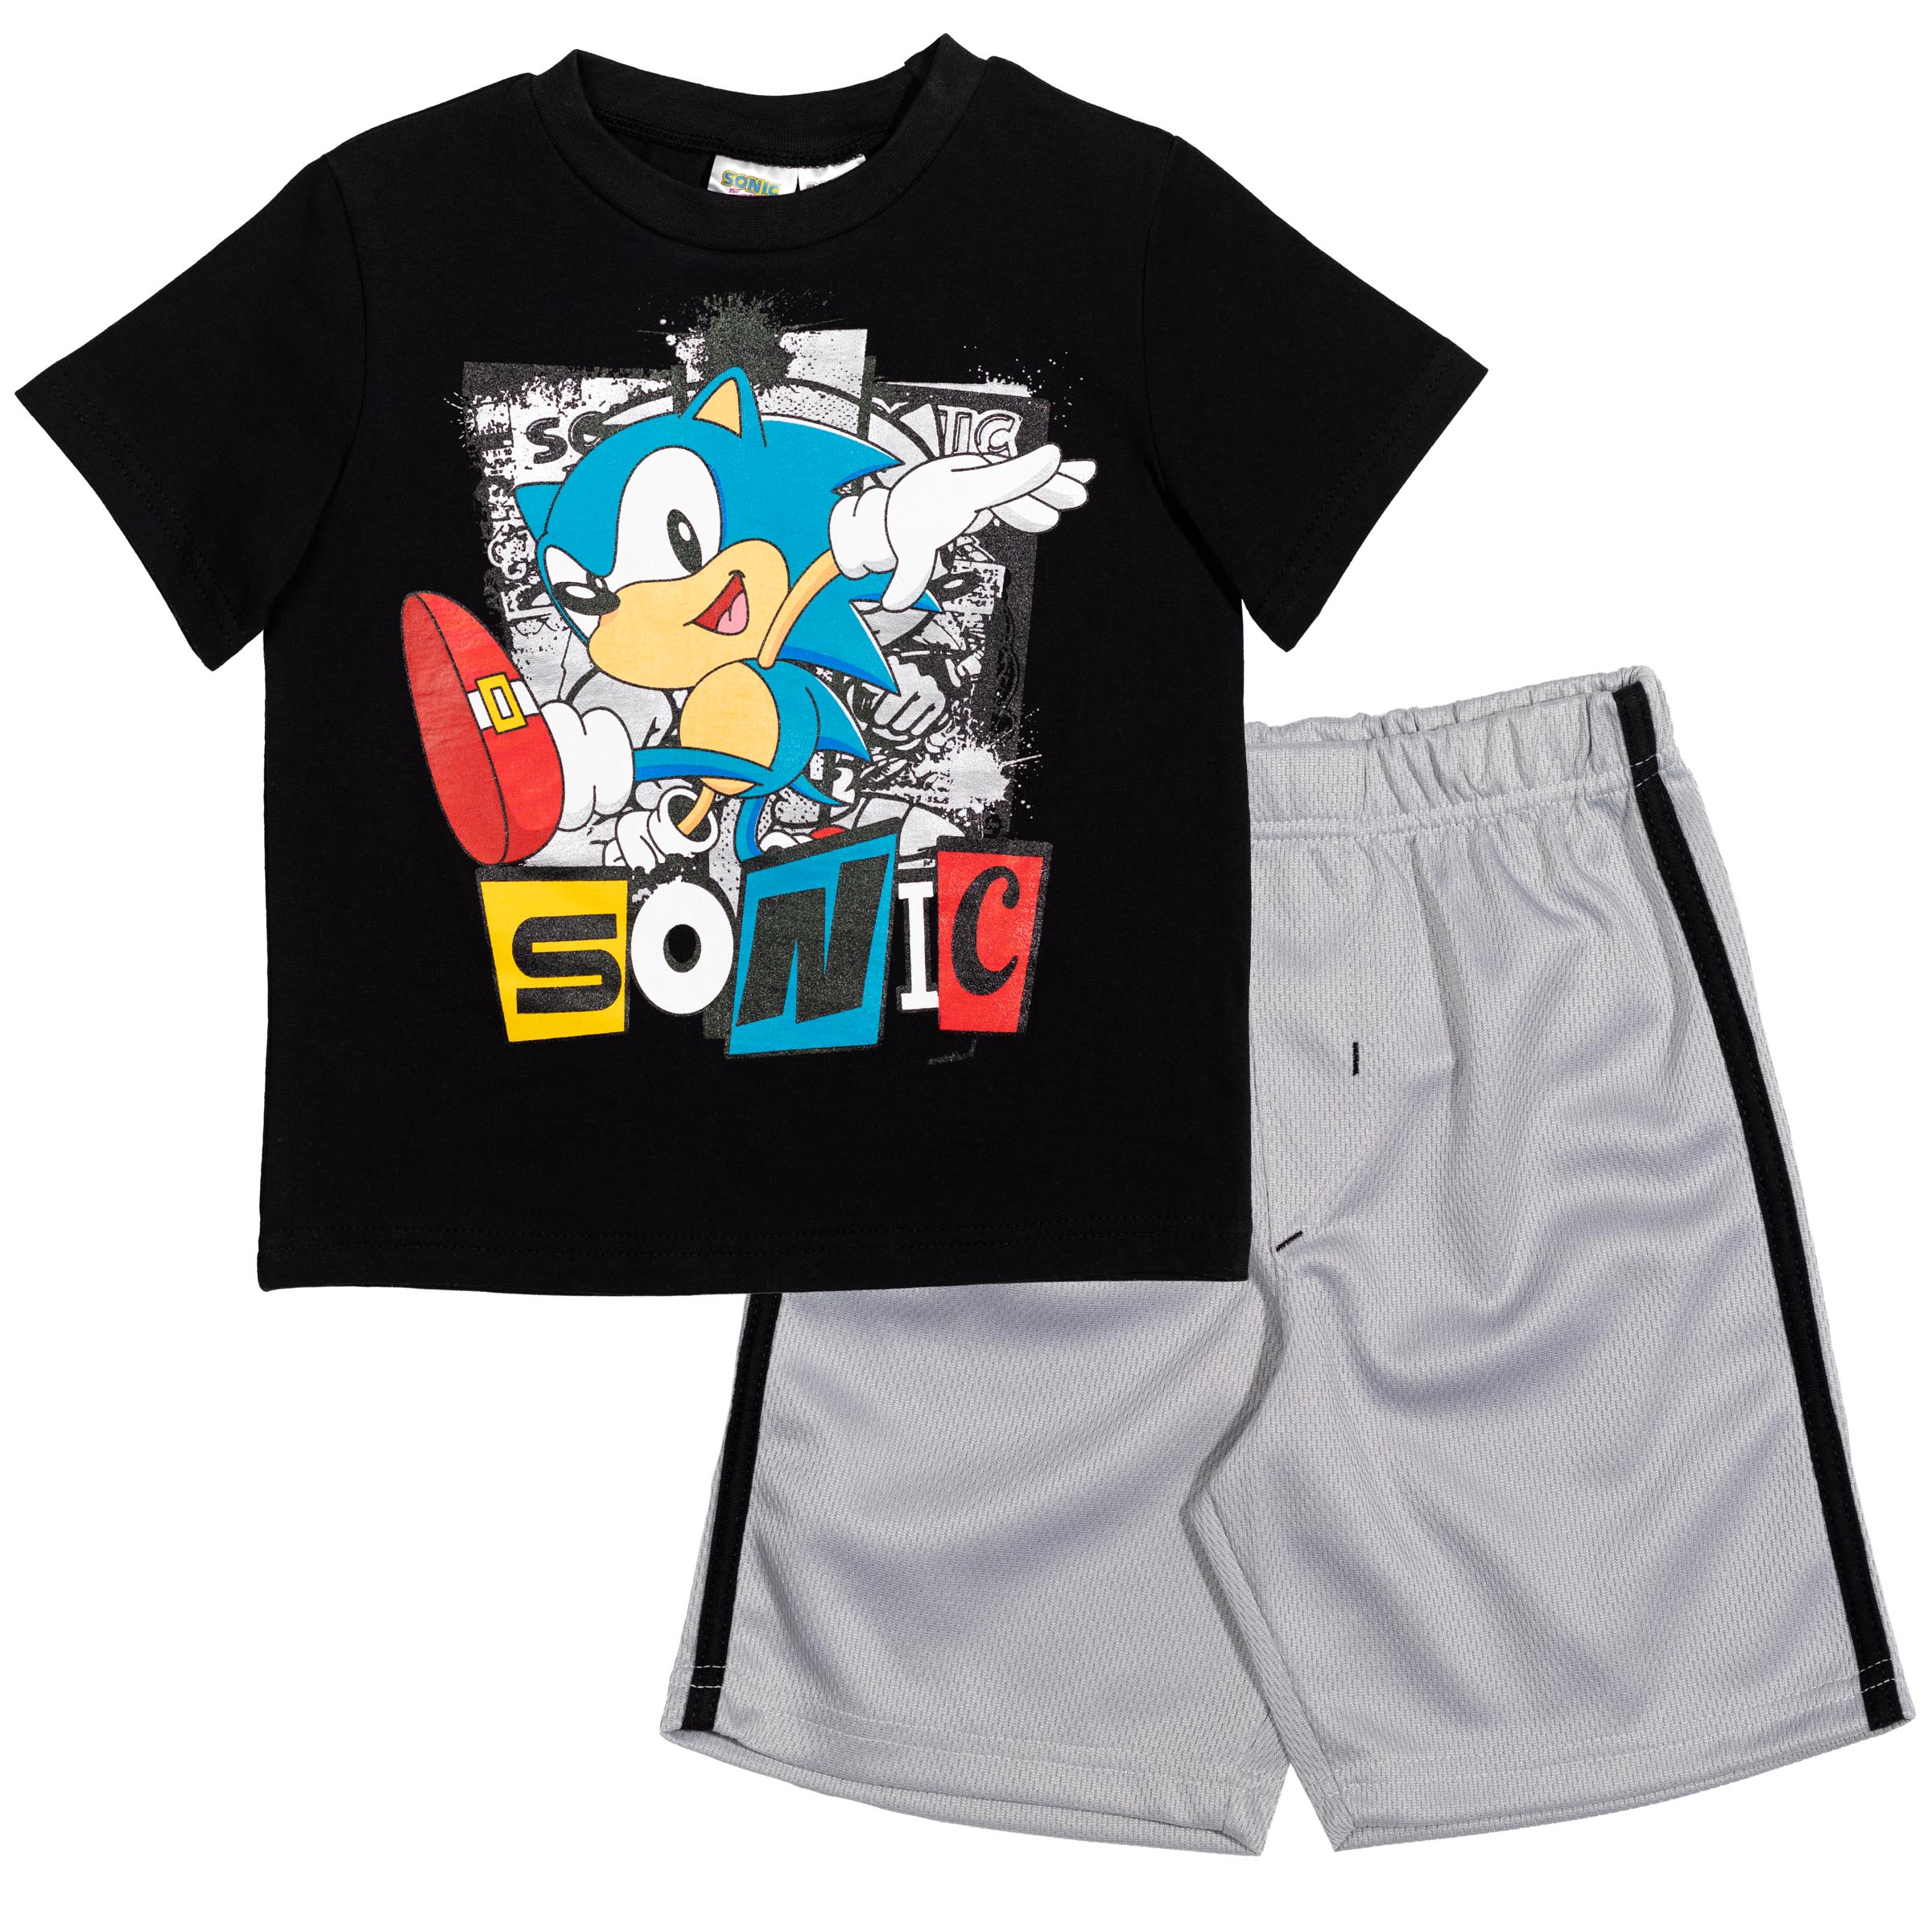 14 years boys girls contrast shorts and t-shirt set 6 months